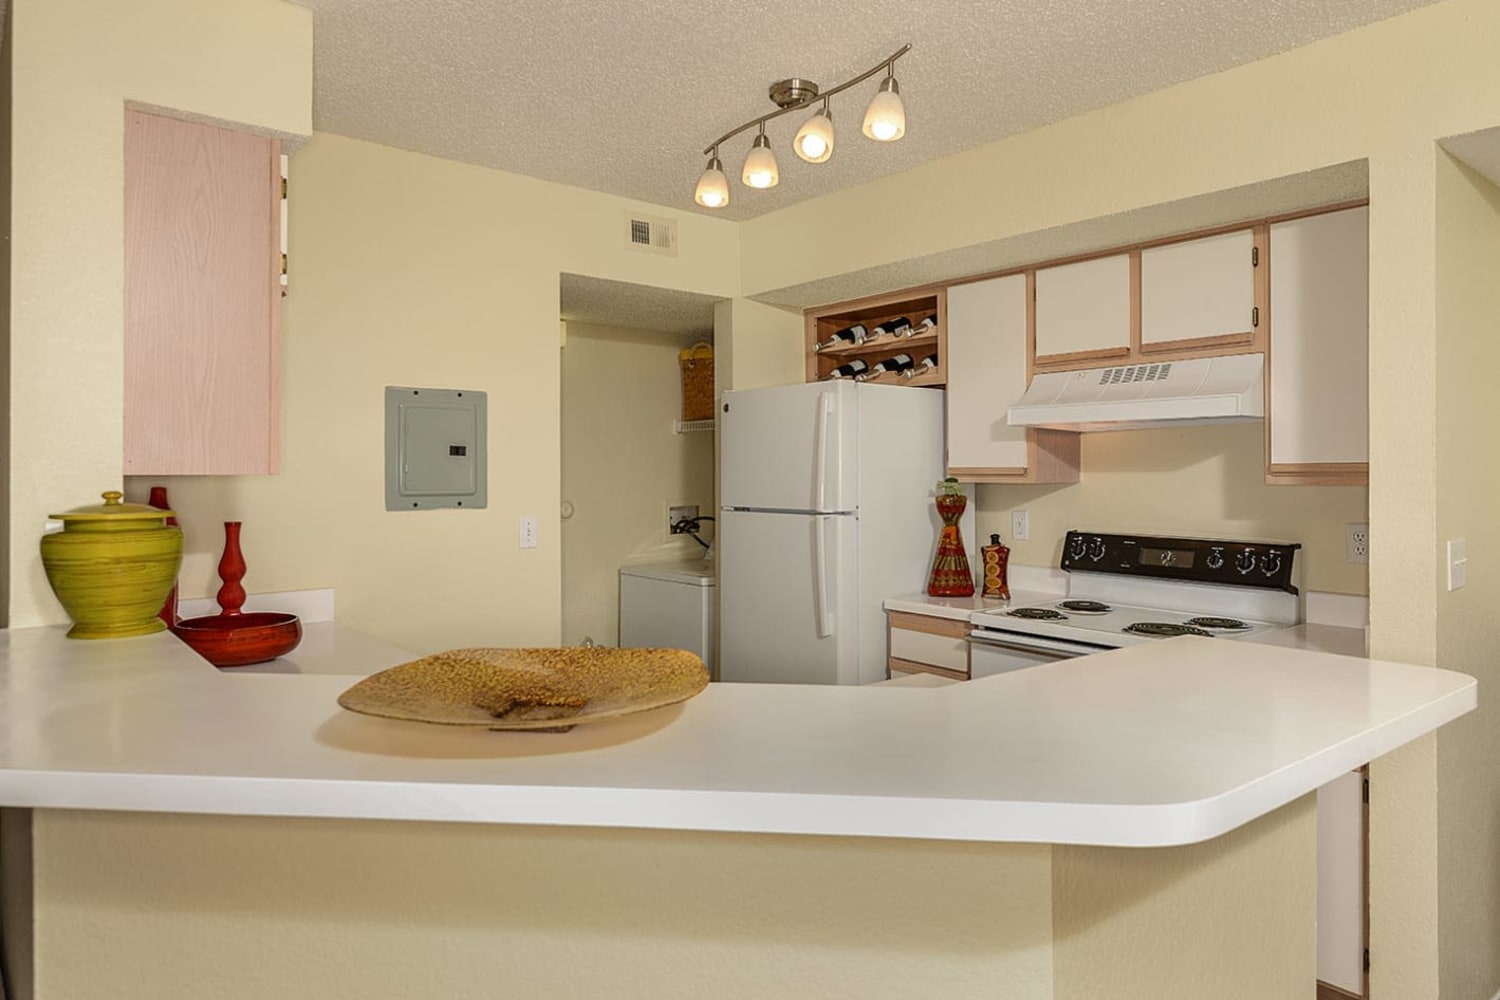 Kitchen at Royal St. George at the Villages Apartment Homes in West Palm Beach, Florida